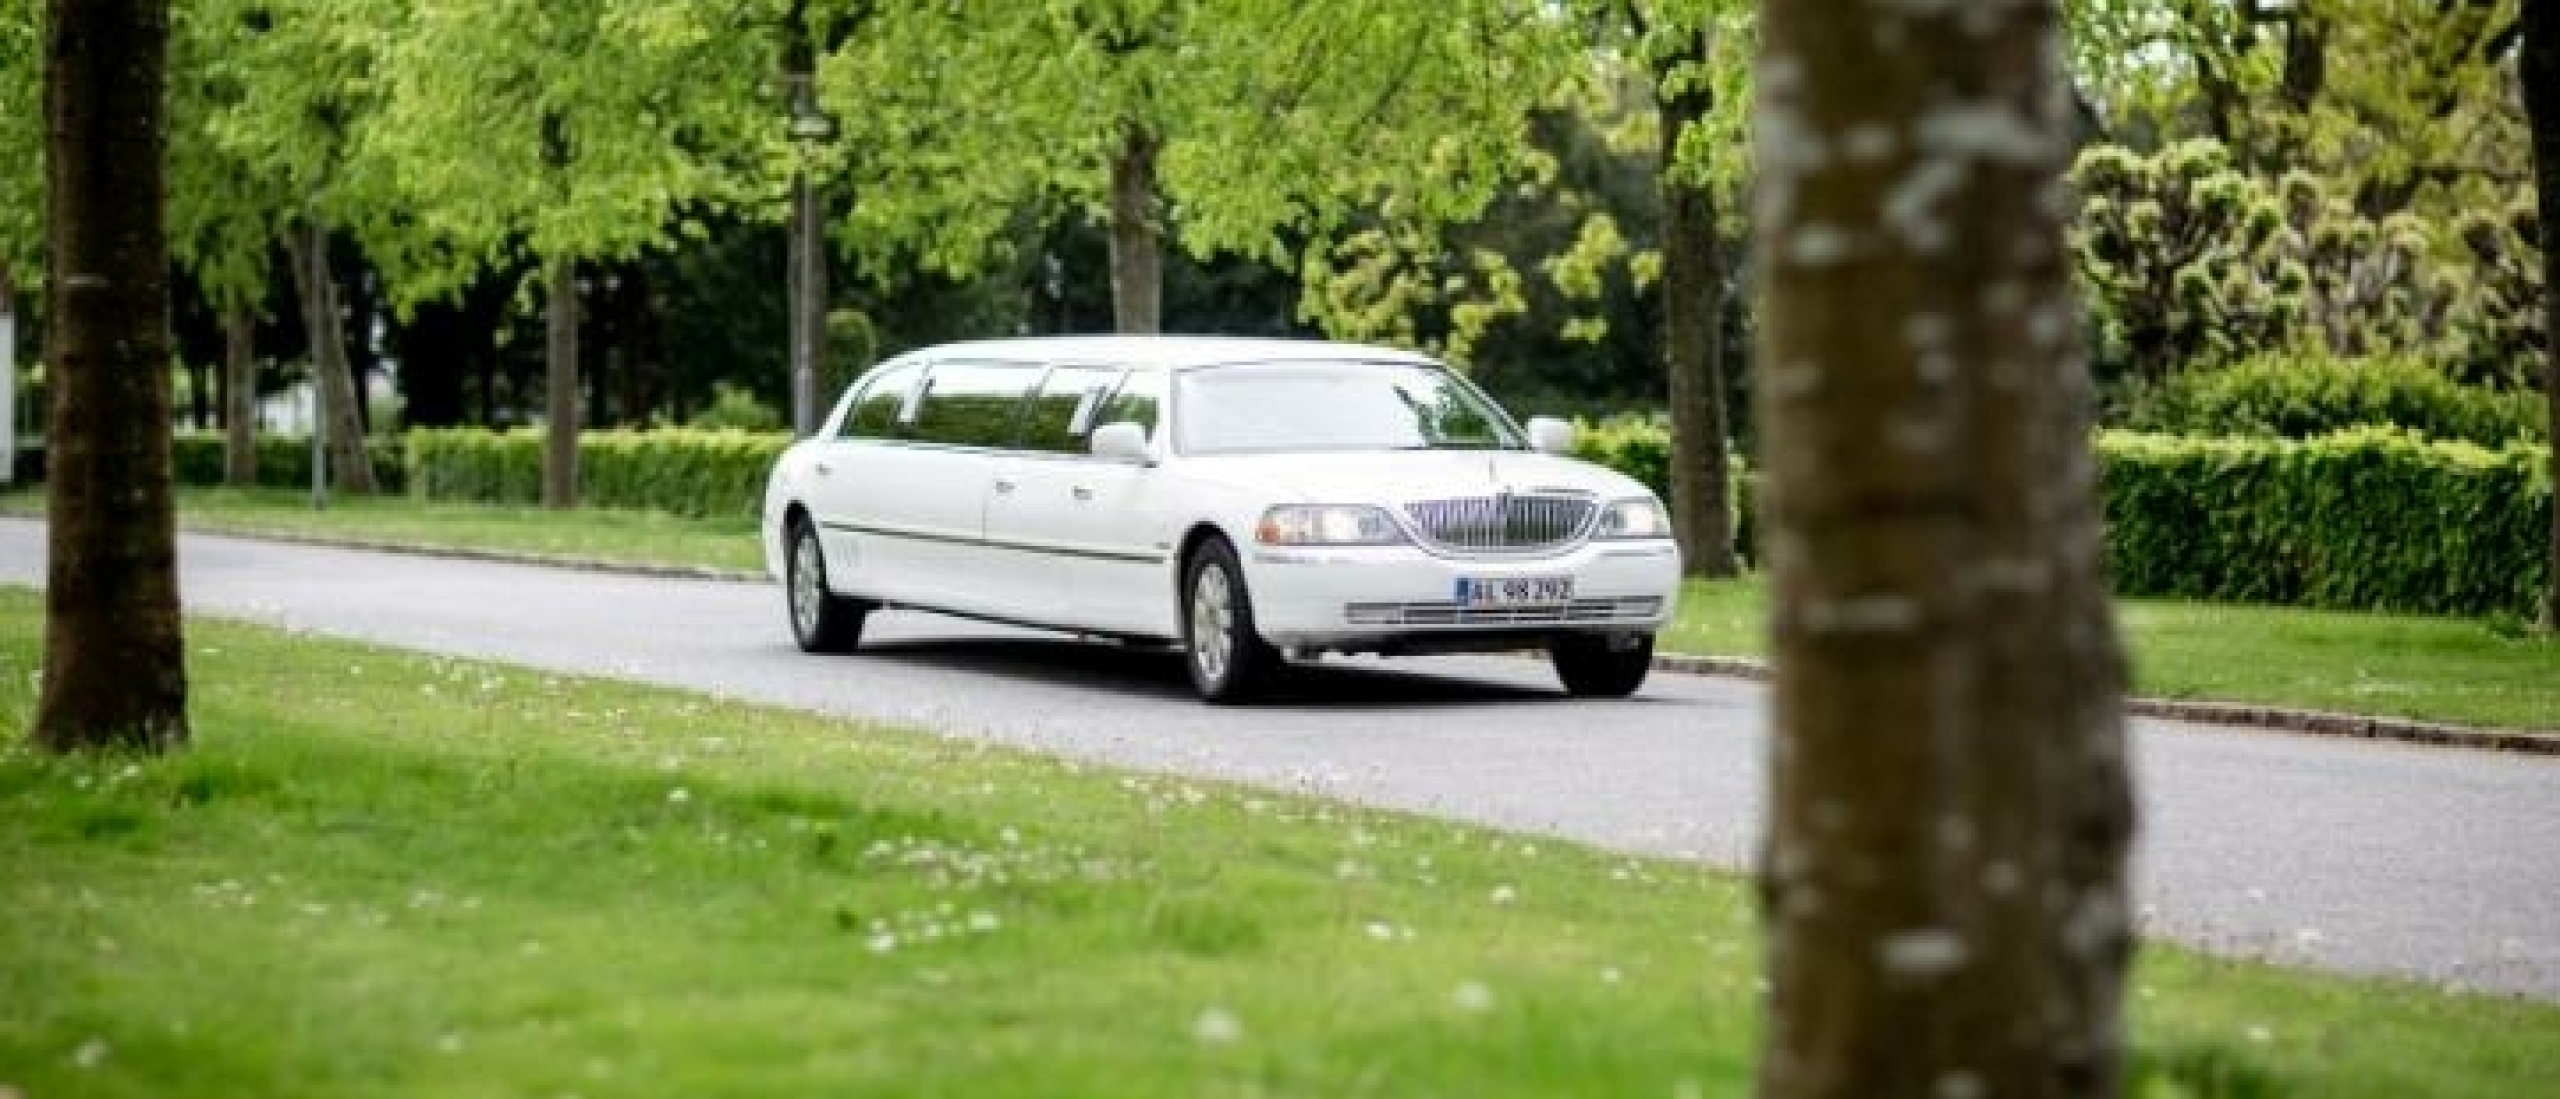 Five Things to Consider Before Hiring a Limo Service for a Wedding